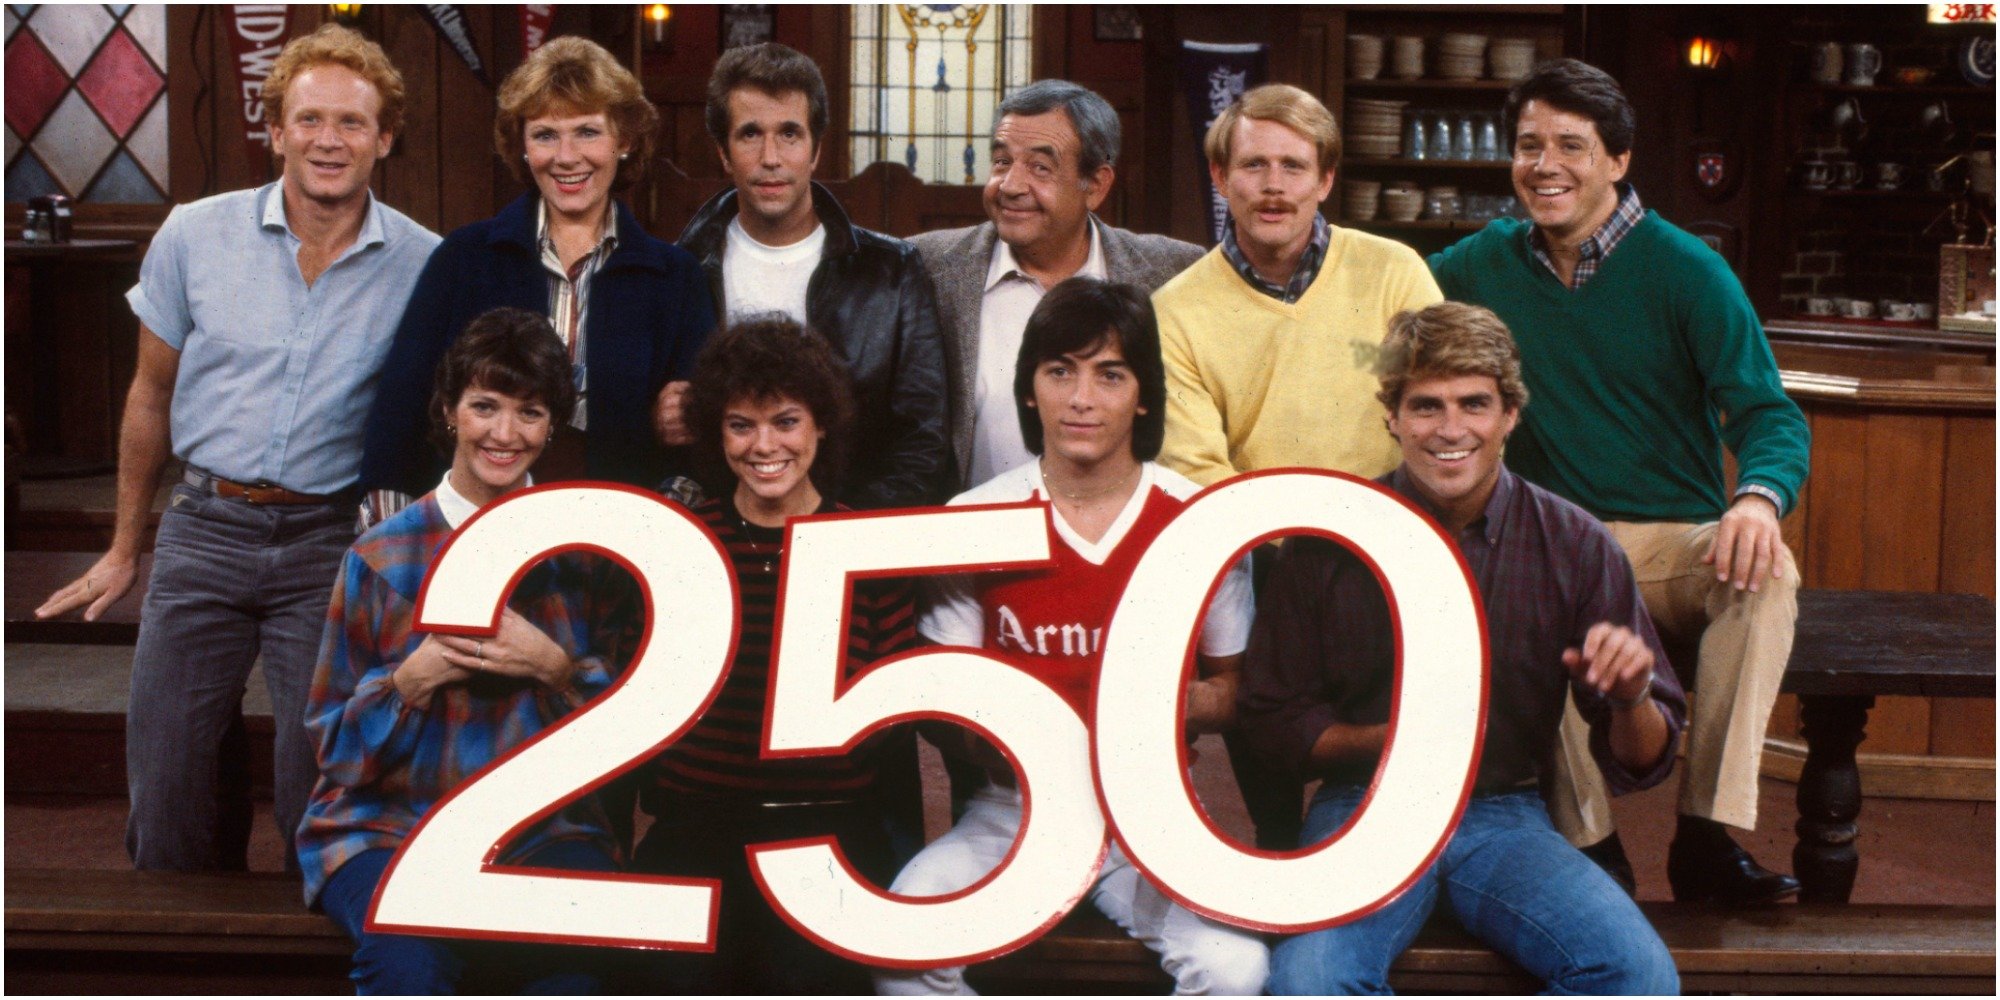 The cast of Happy Days, which members have died?